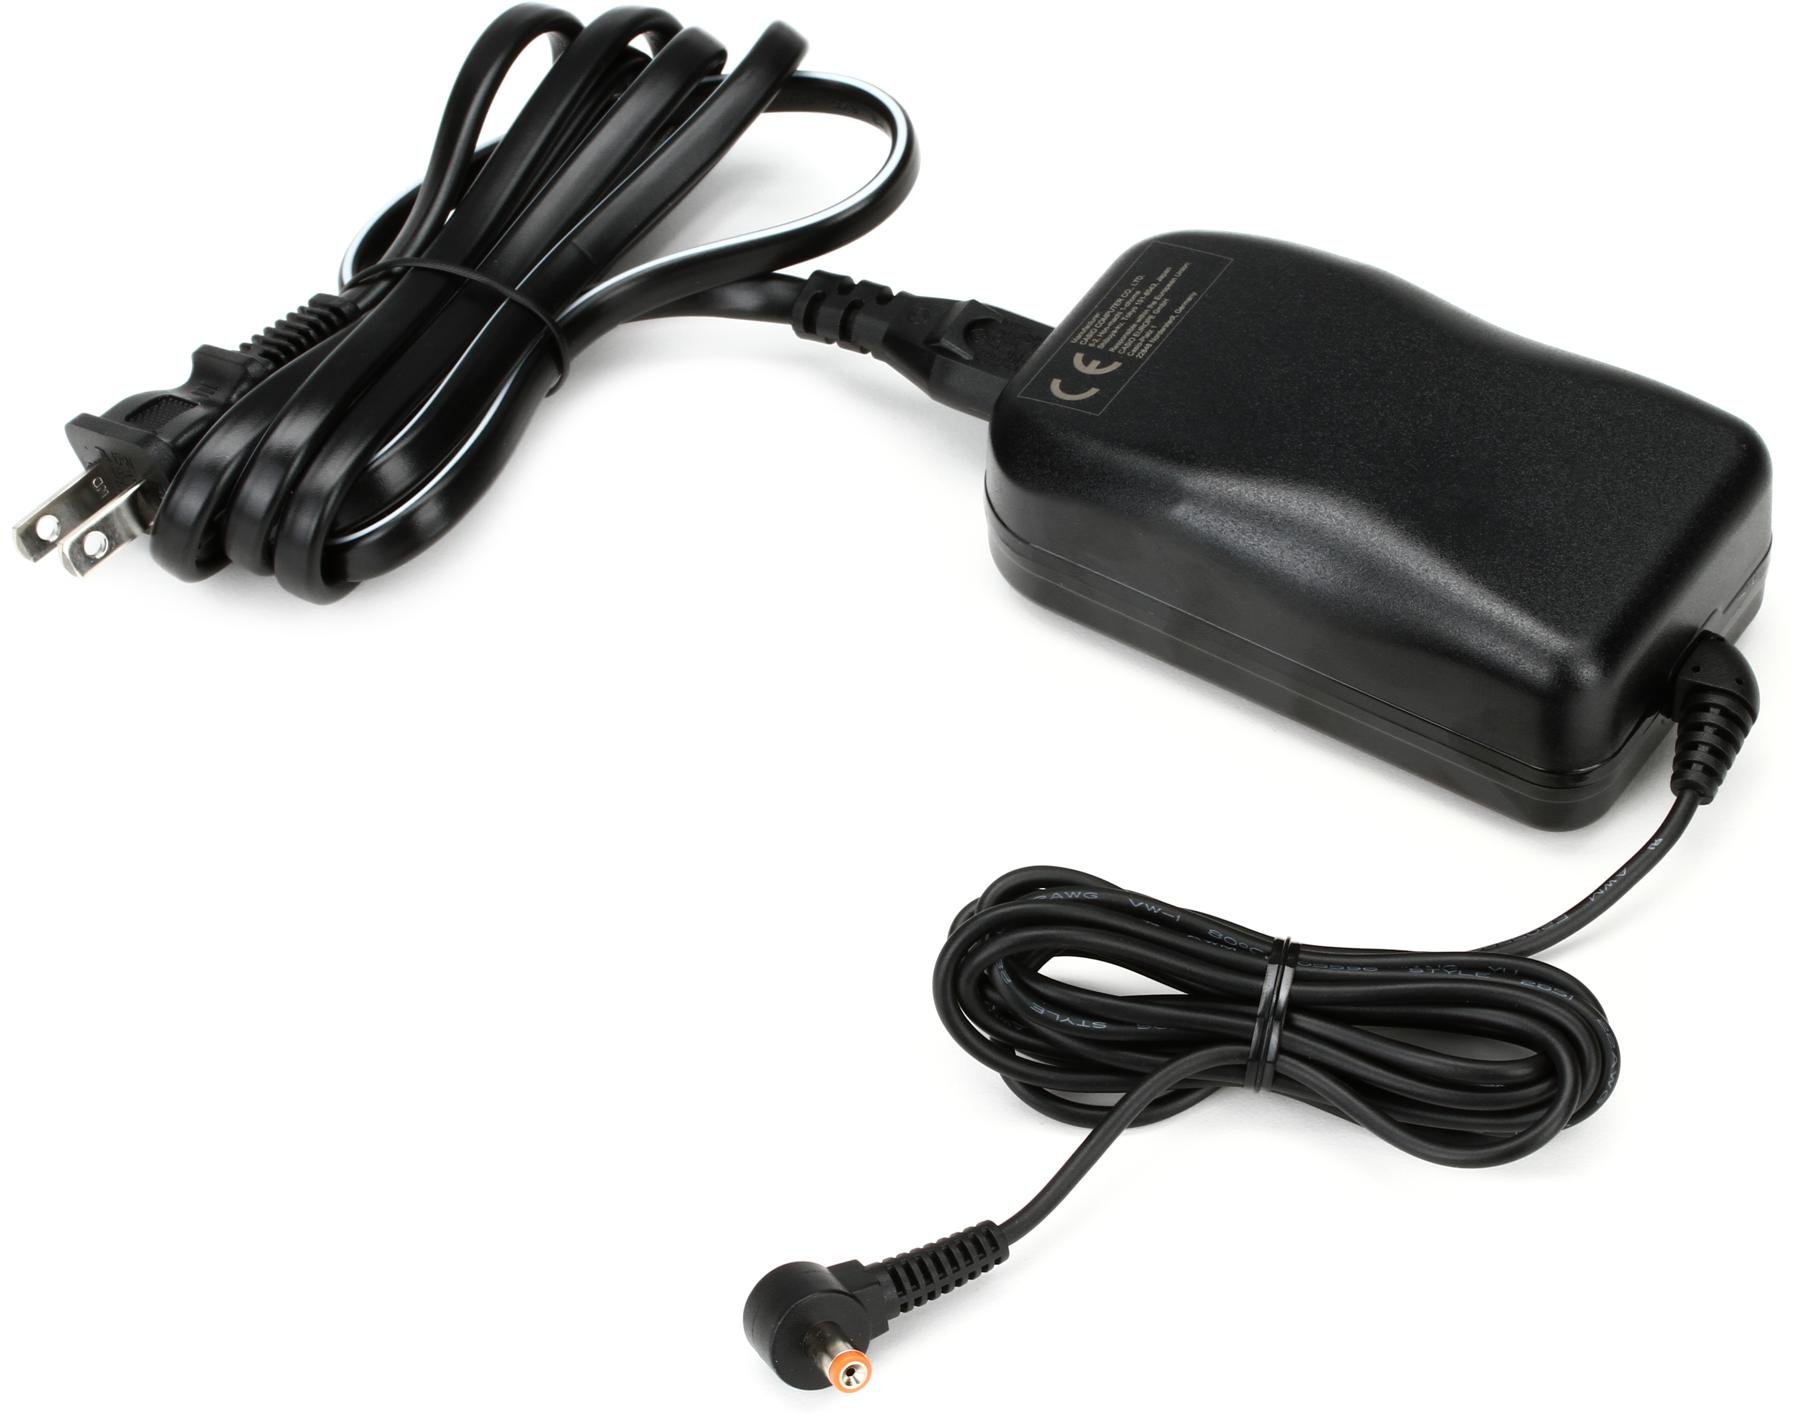 10ft Cord 12V AC DC Adapter Charger Compatible with Casio for AD-12UL WK-1630 WK-3700 WK-3800 Piano Privia PX-100 PX-110 PX-320 PX-400R PX-500L Portal Electronic Piano and Keyboard Power Supply